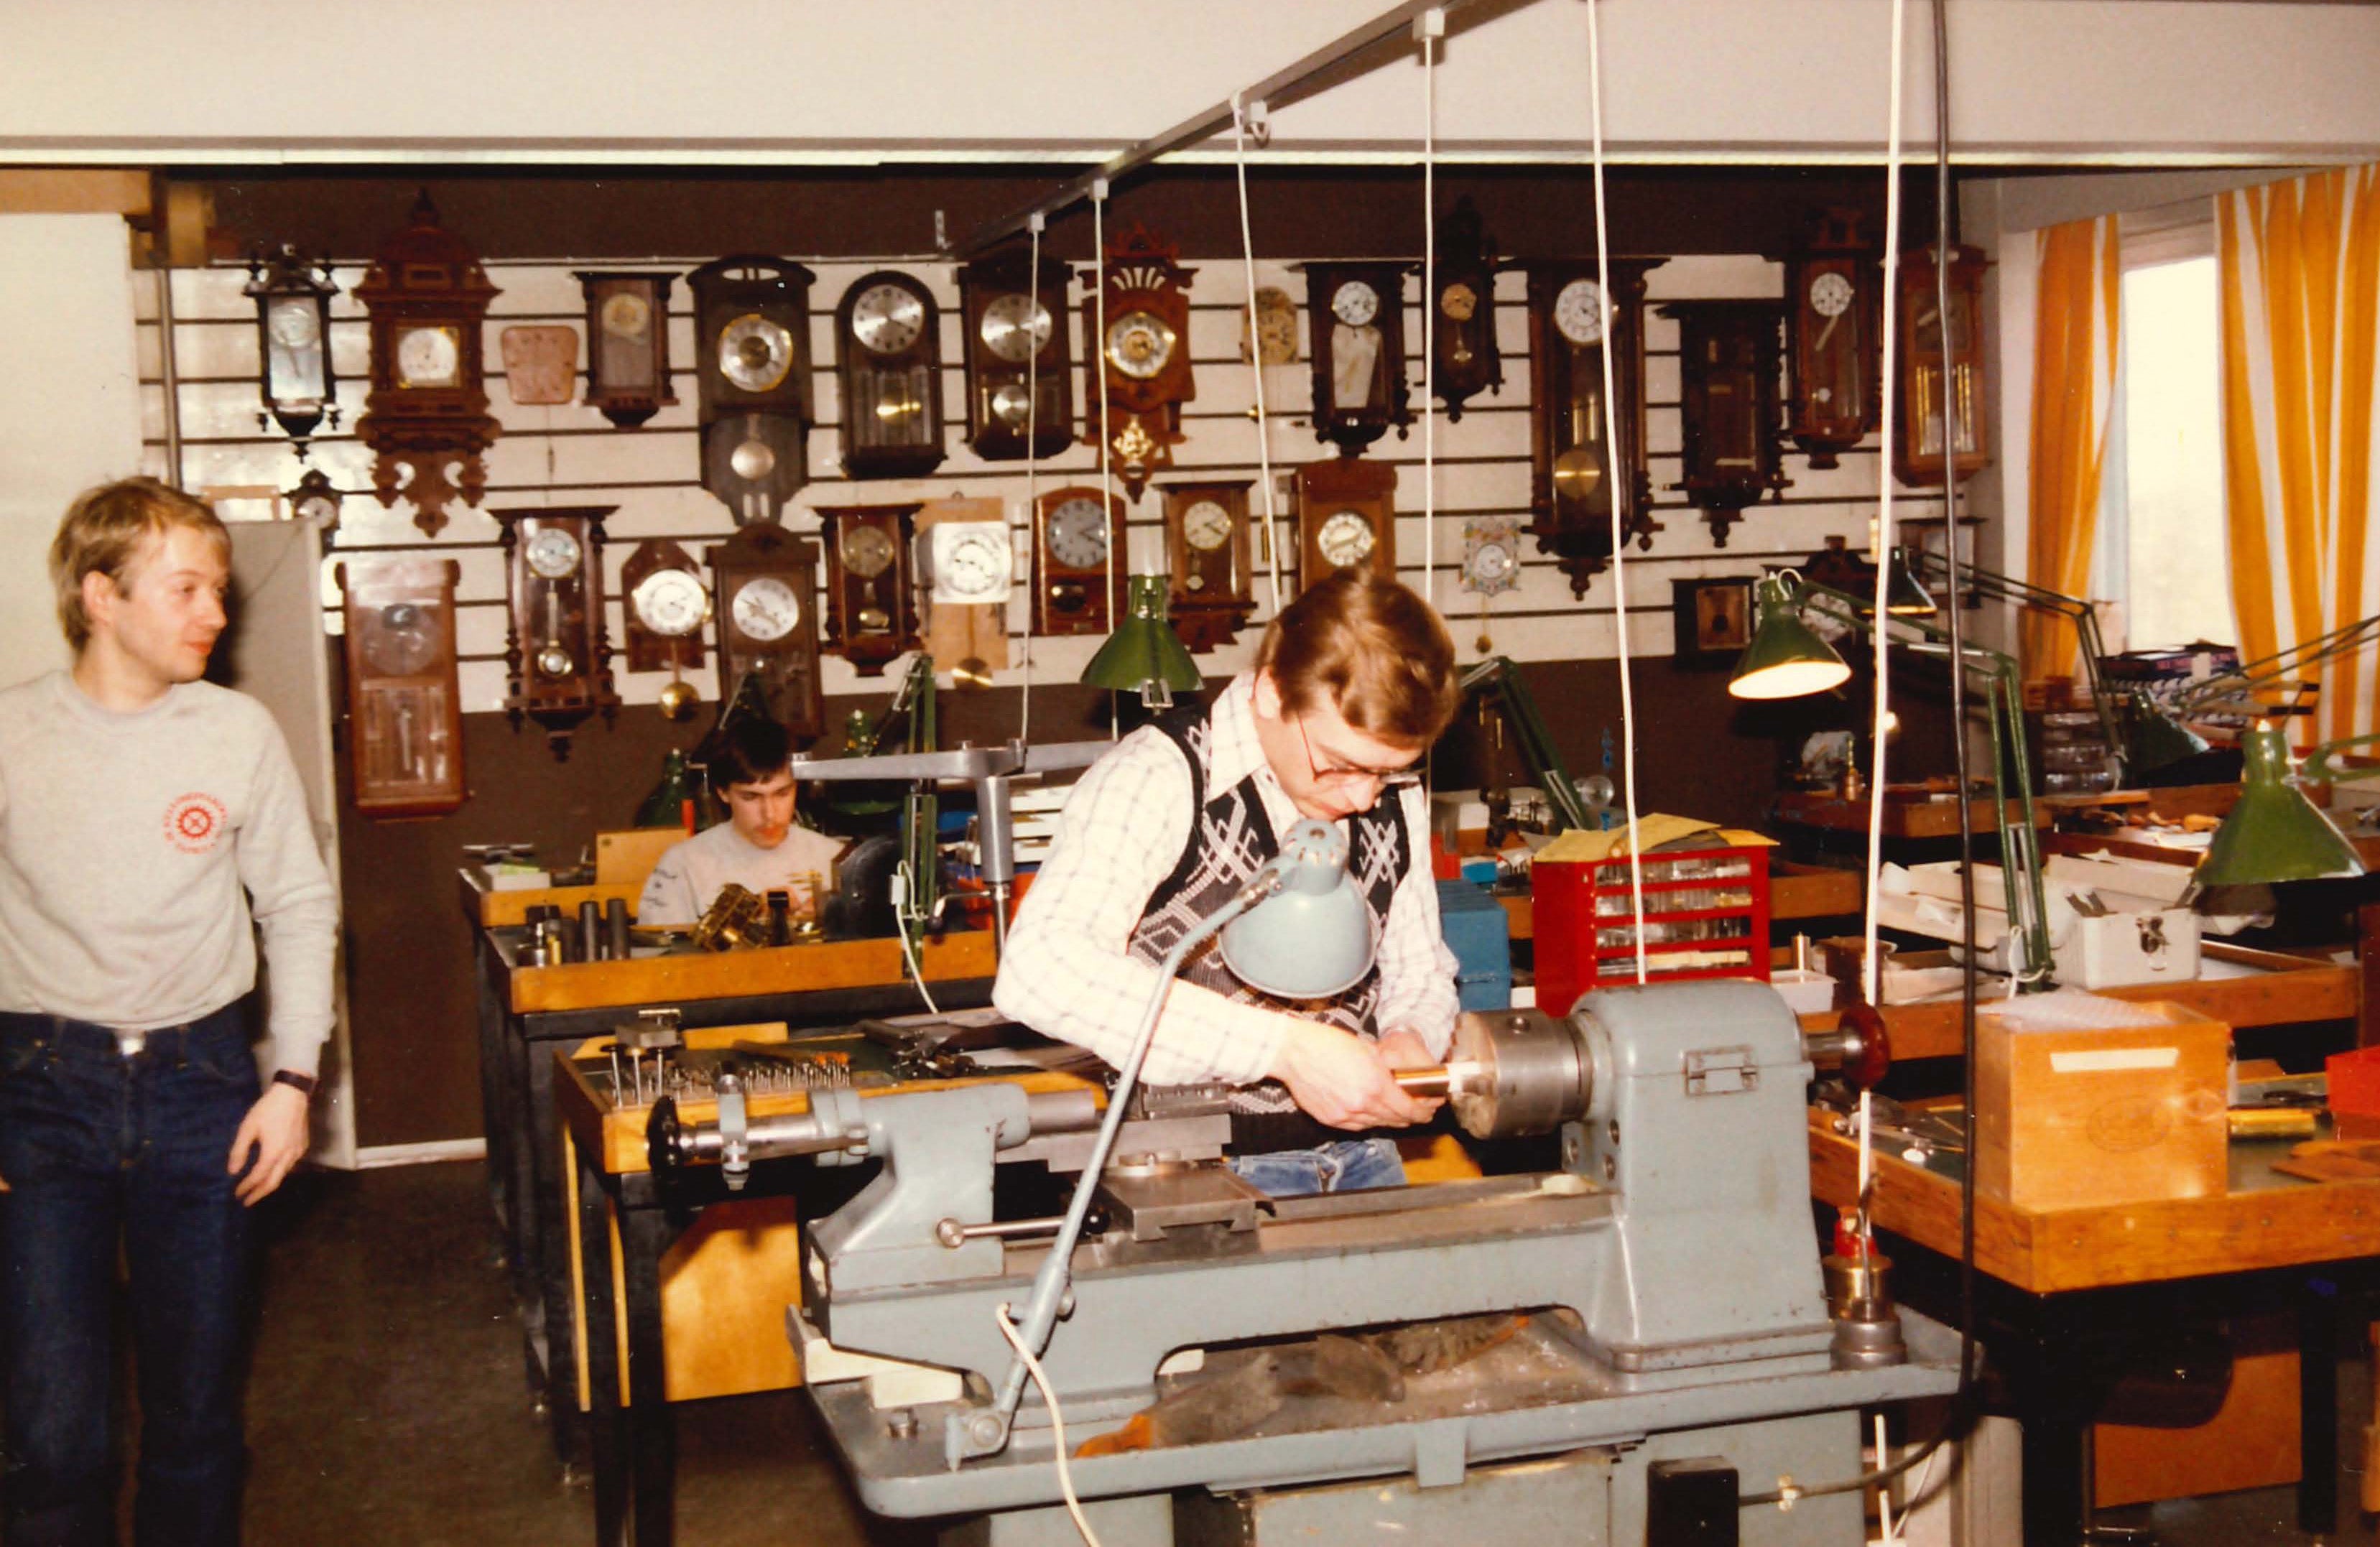 Finnish School of watchmaking inside a workshop archival image for A Collected Man London